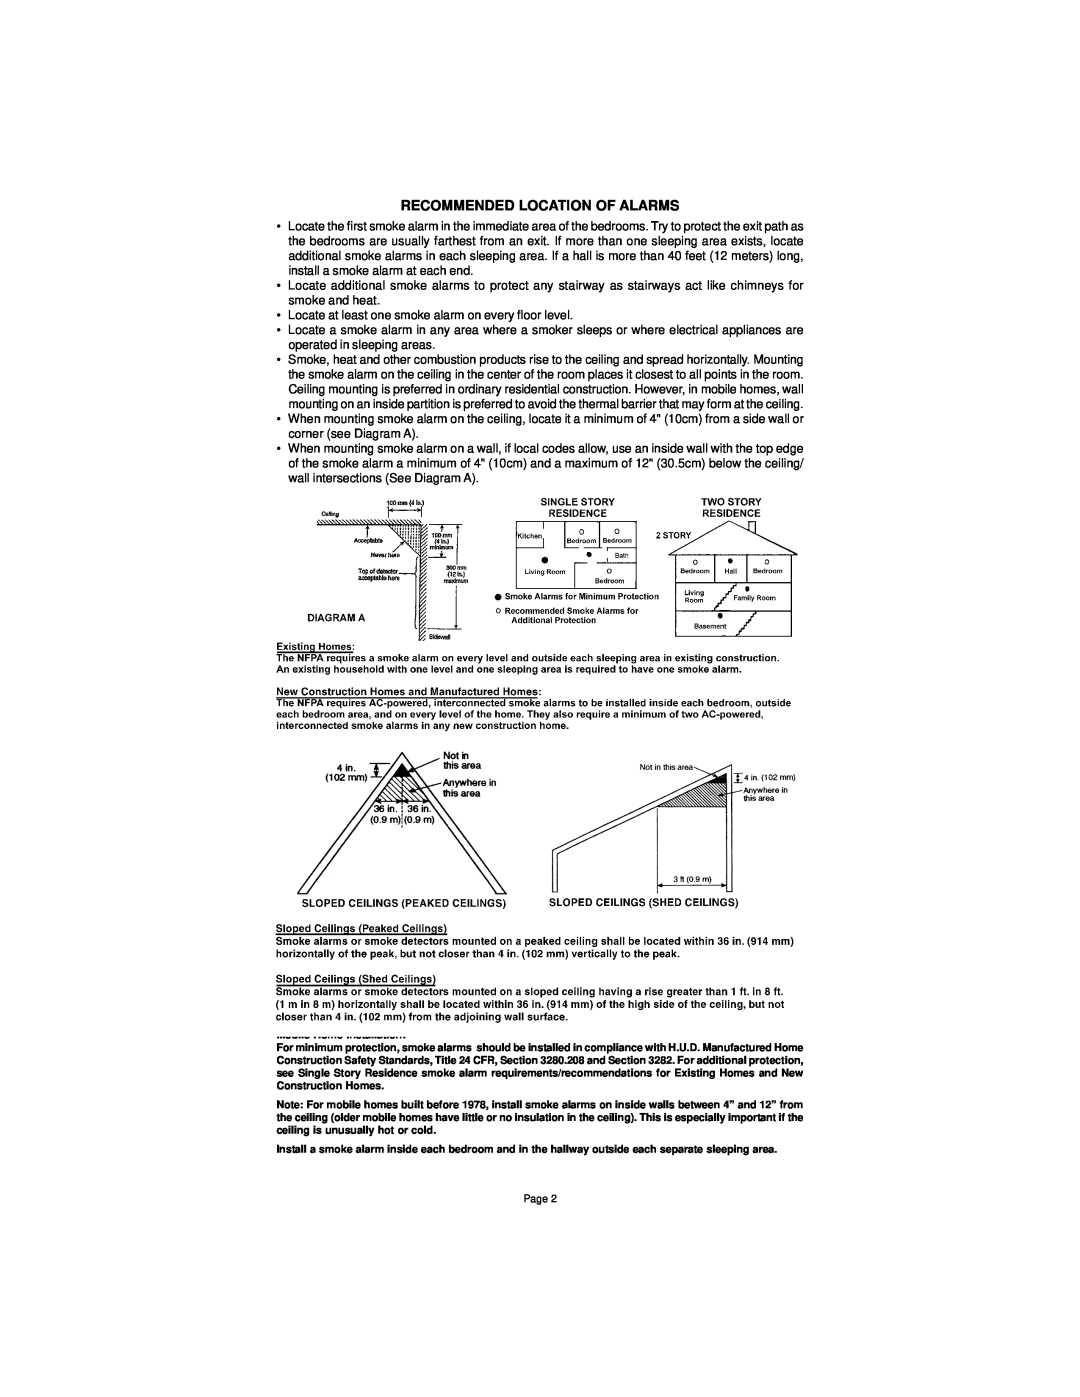 Universal SS-901-LR manual Recommended Location Of Alarms 